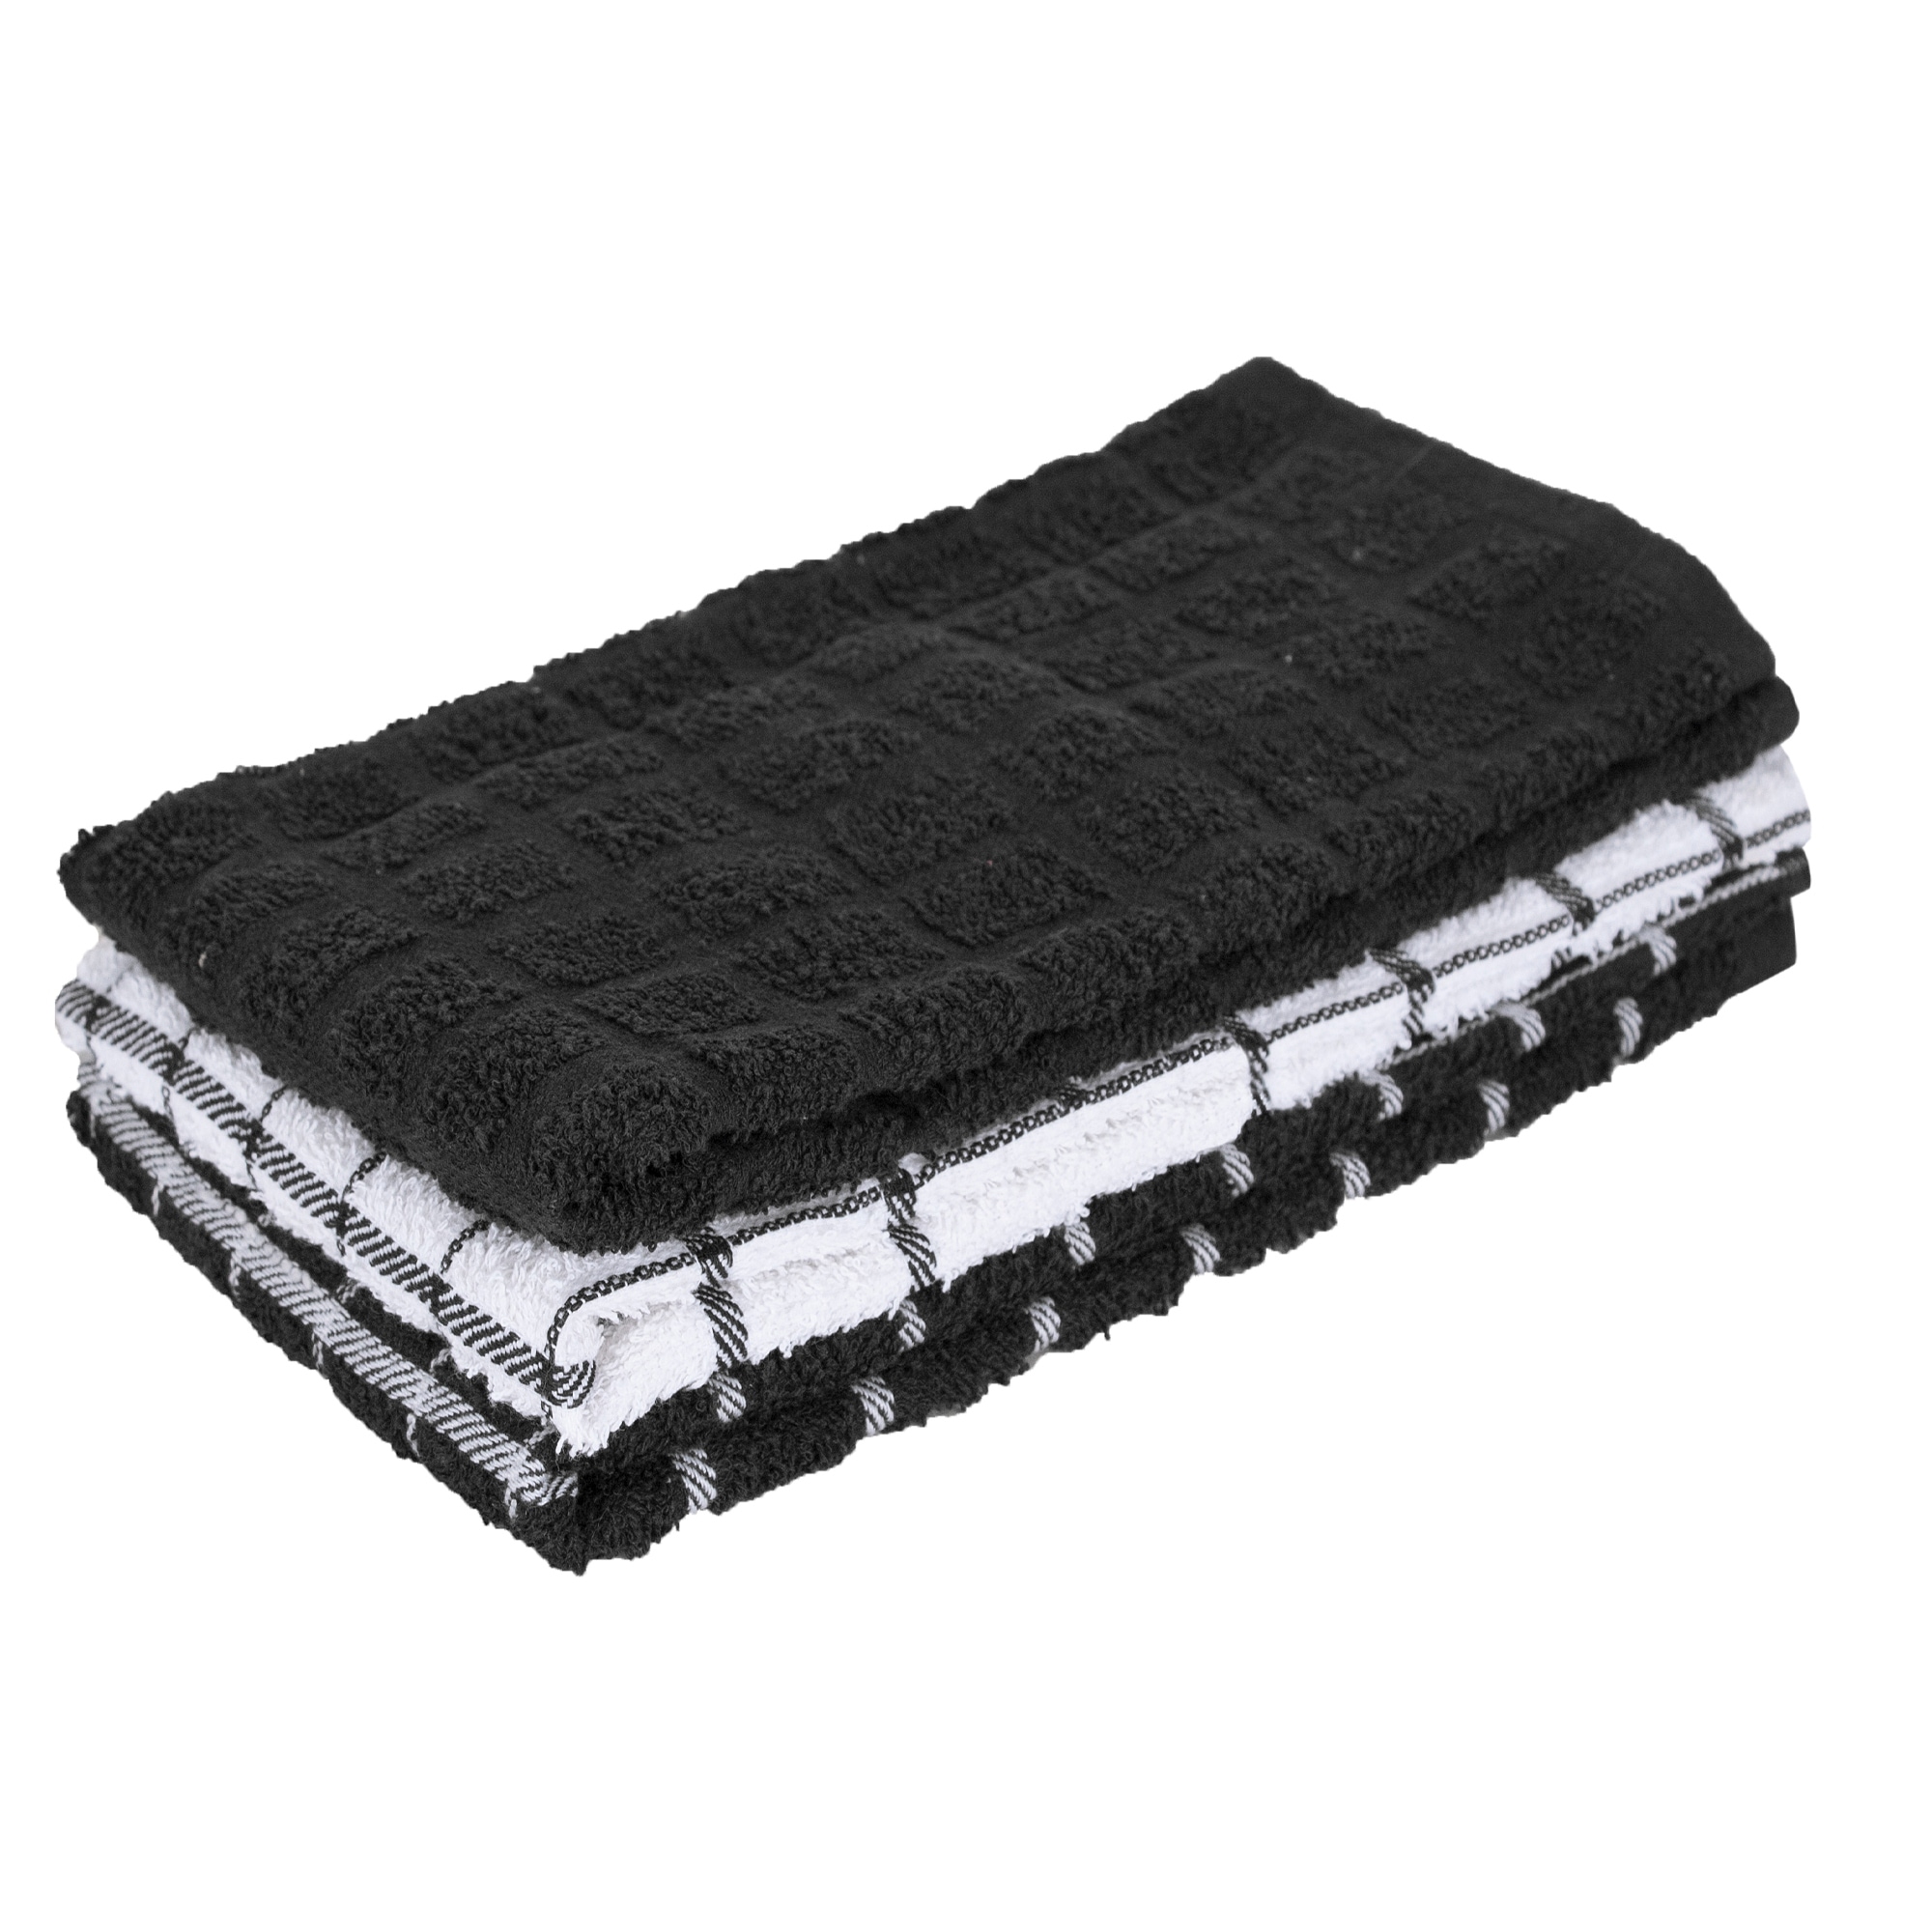 https://ak1.ostkcdn.com/images/products/is/images/direct/609a20f5a6a57481302a230723d7dbd3184ddd55/RITZ-Terry-Check-Kitchen-Towel%2C-Set-of-3.jpg